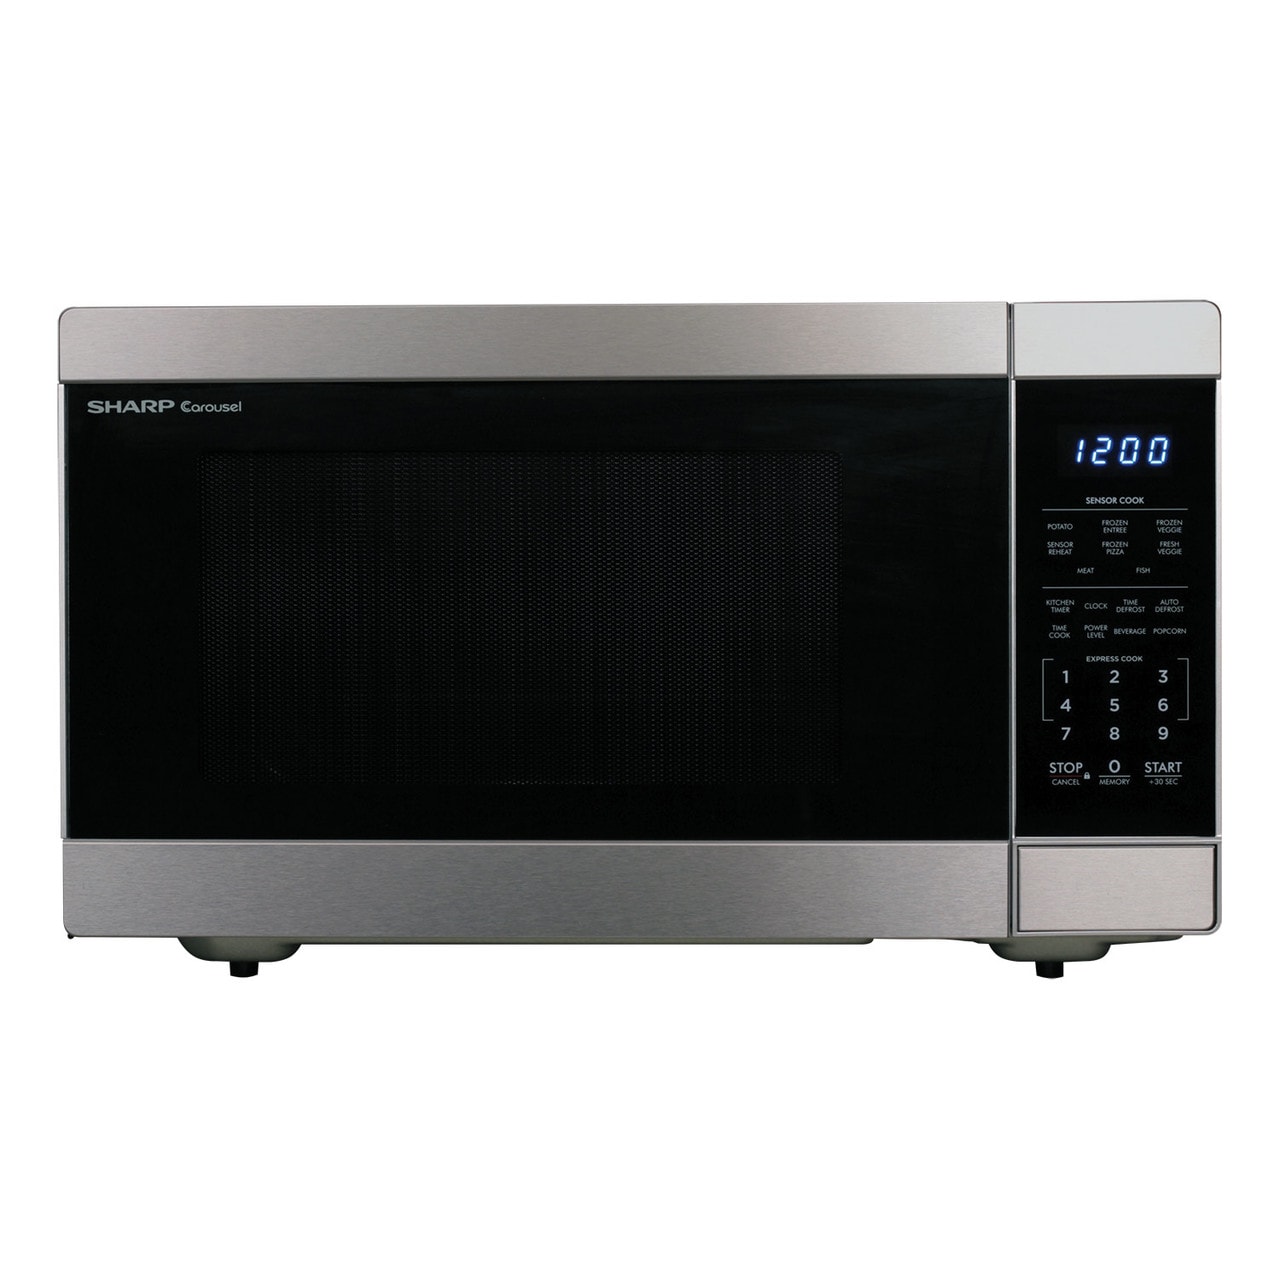 maytag 30 in w 19 cuft over the range convection microwave in range microwave maytag microwave stainless steel microwave on does lowes sell microwaves